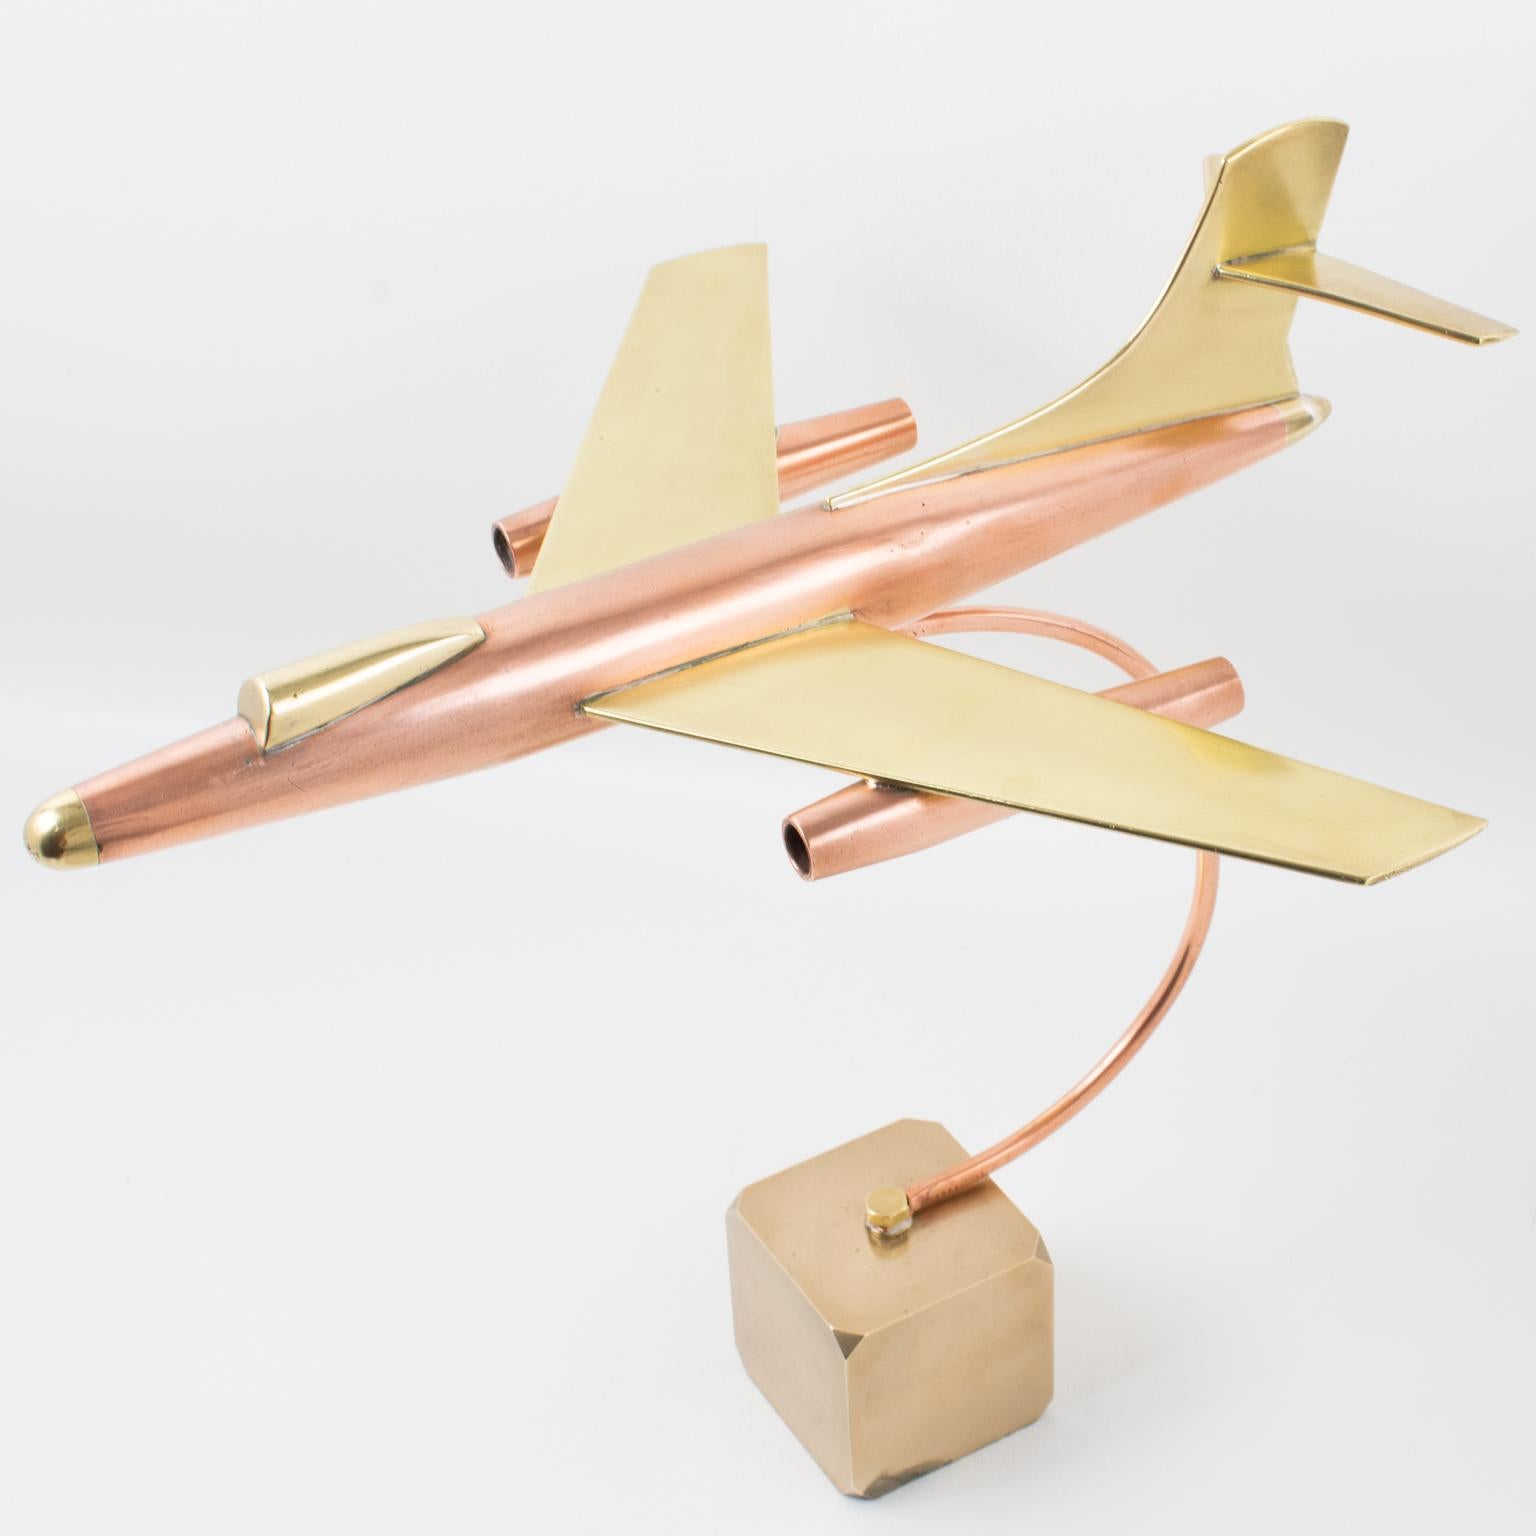 Brass and Copper Airplane Jet Aviation Model, France 1960s For Sale 6